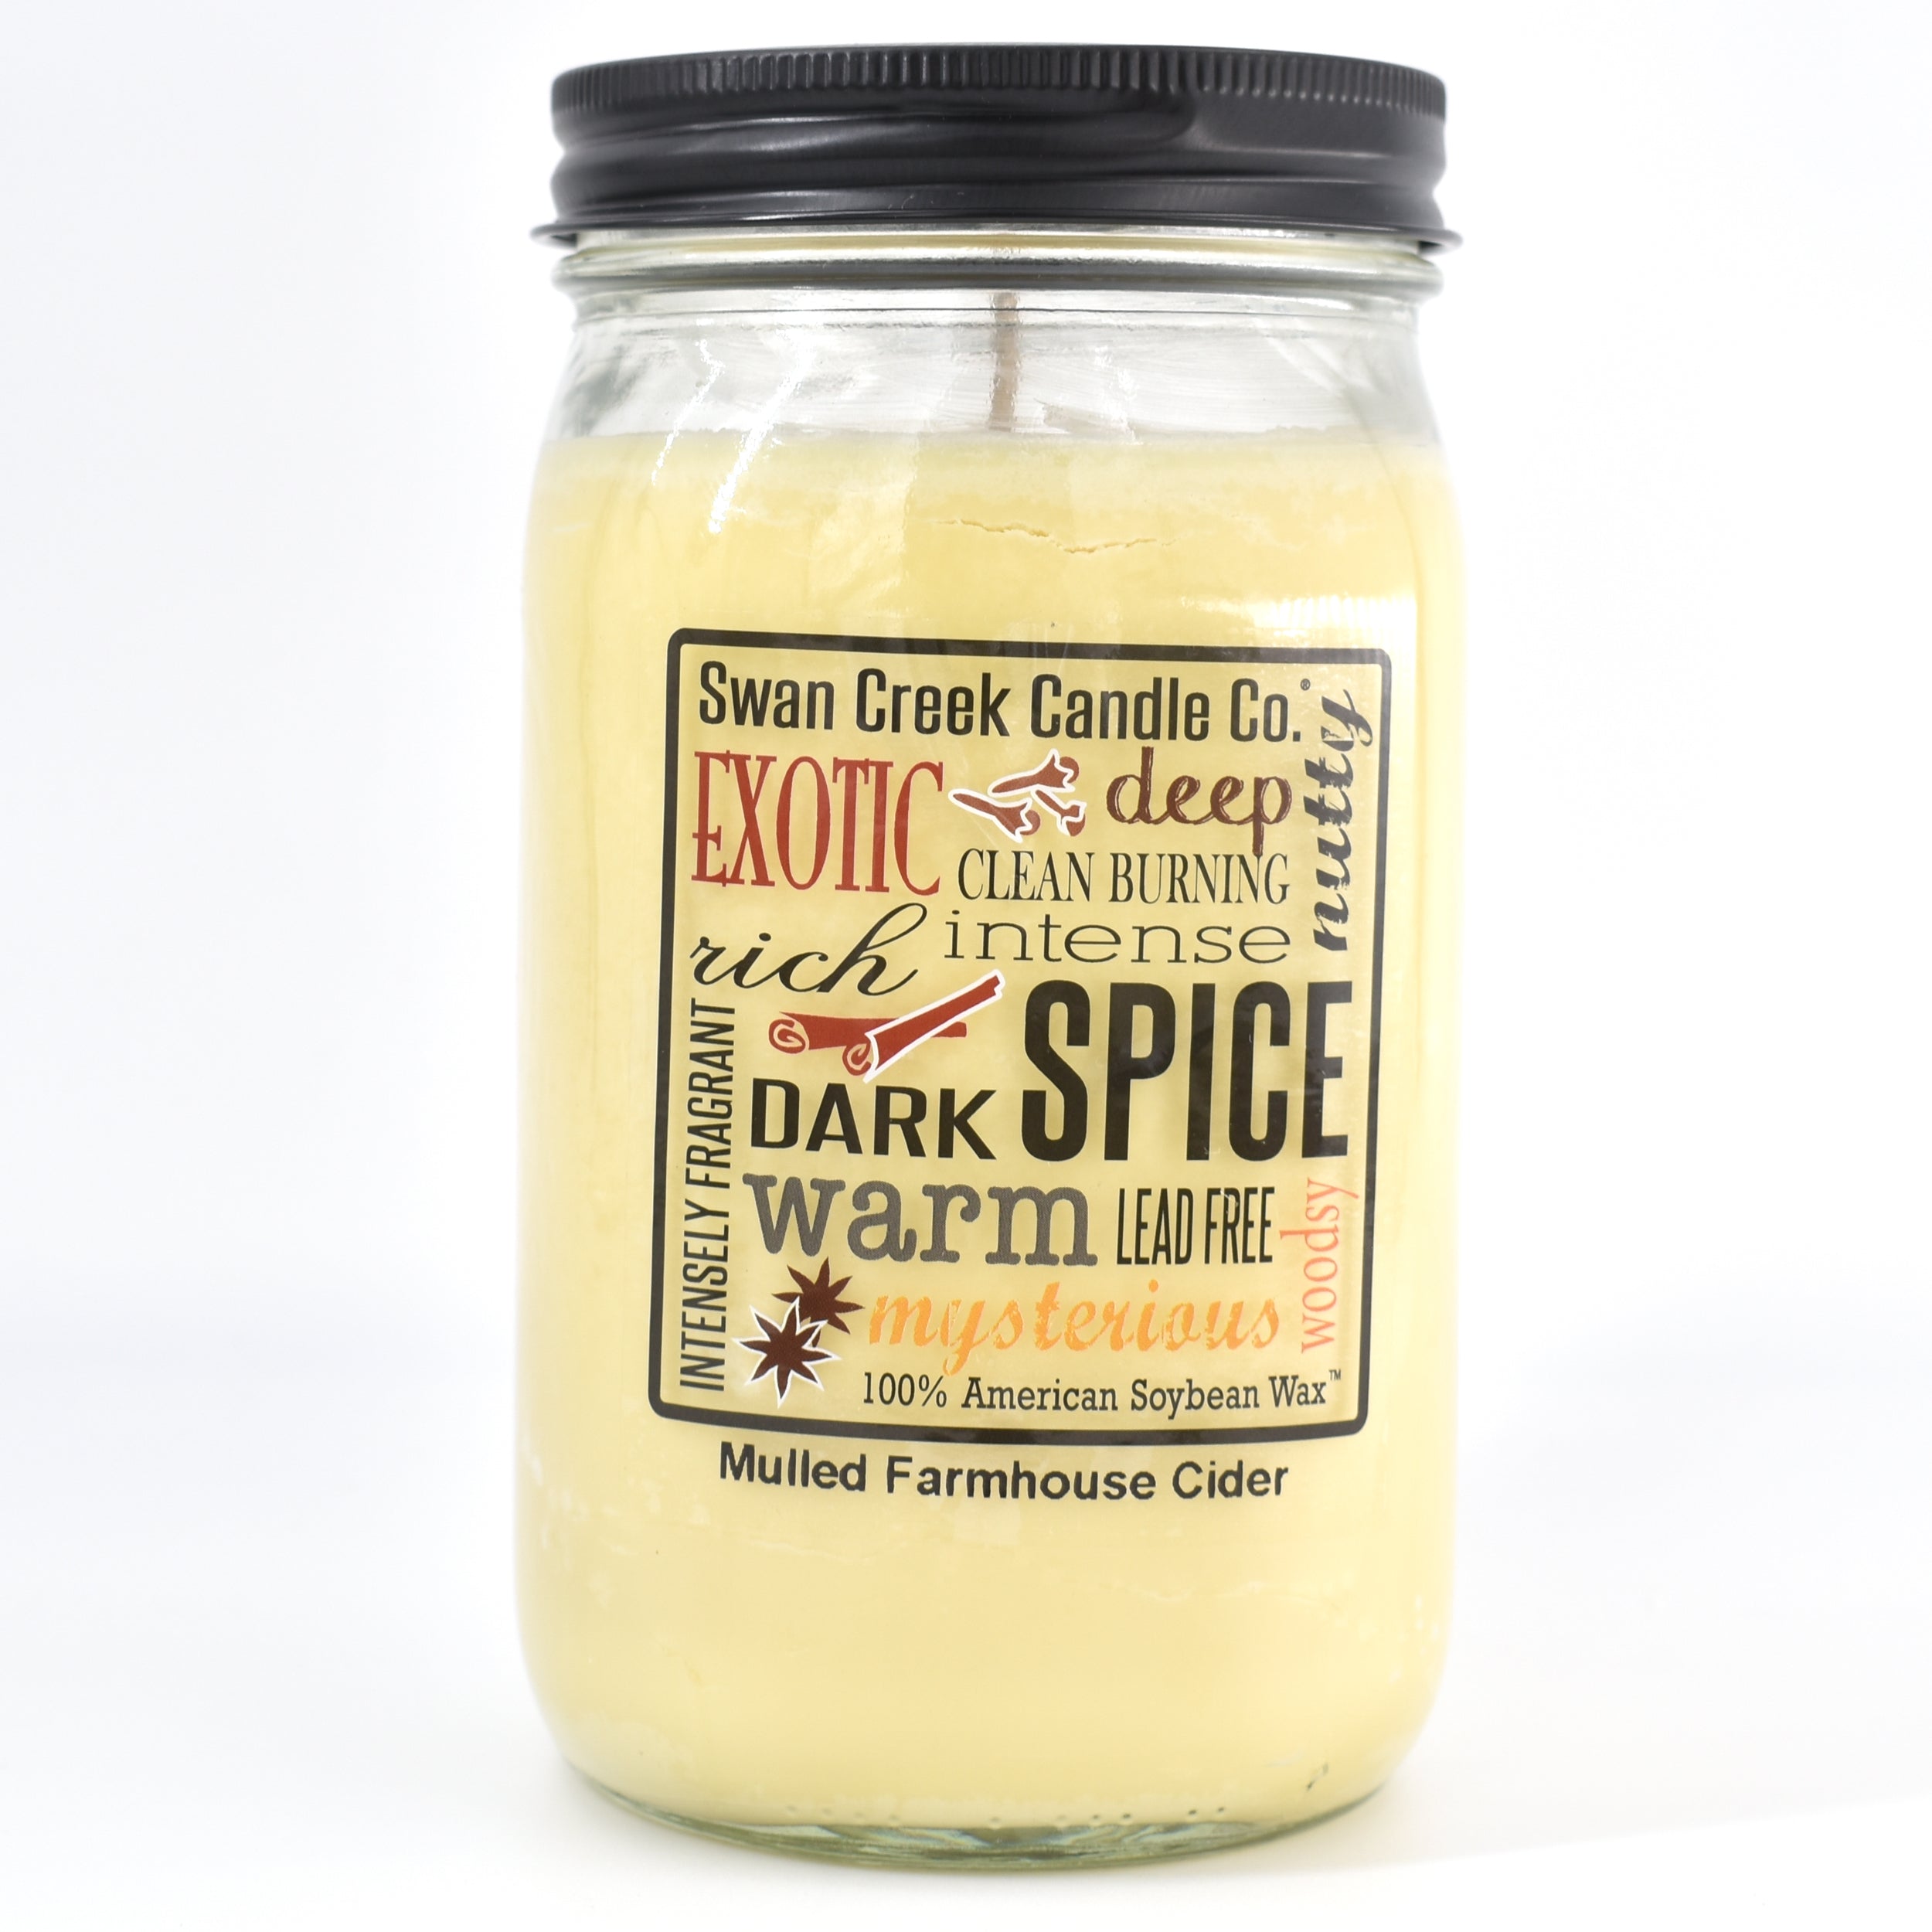 Mulled Farmhouse Cider Pantry Swan Creek Candle